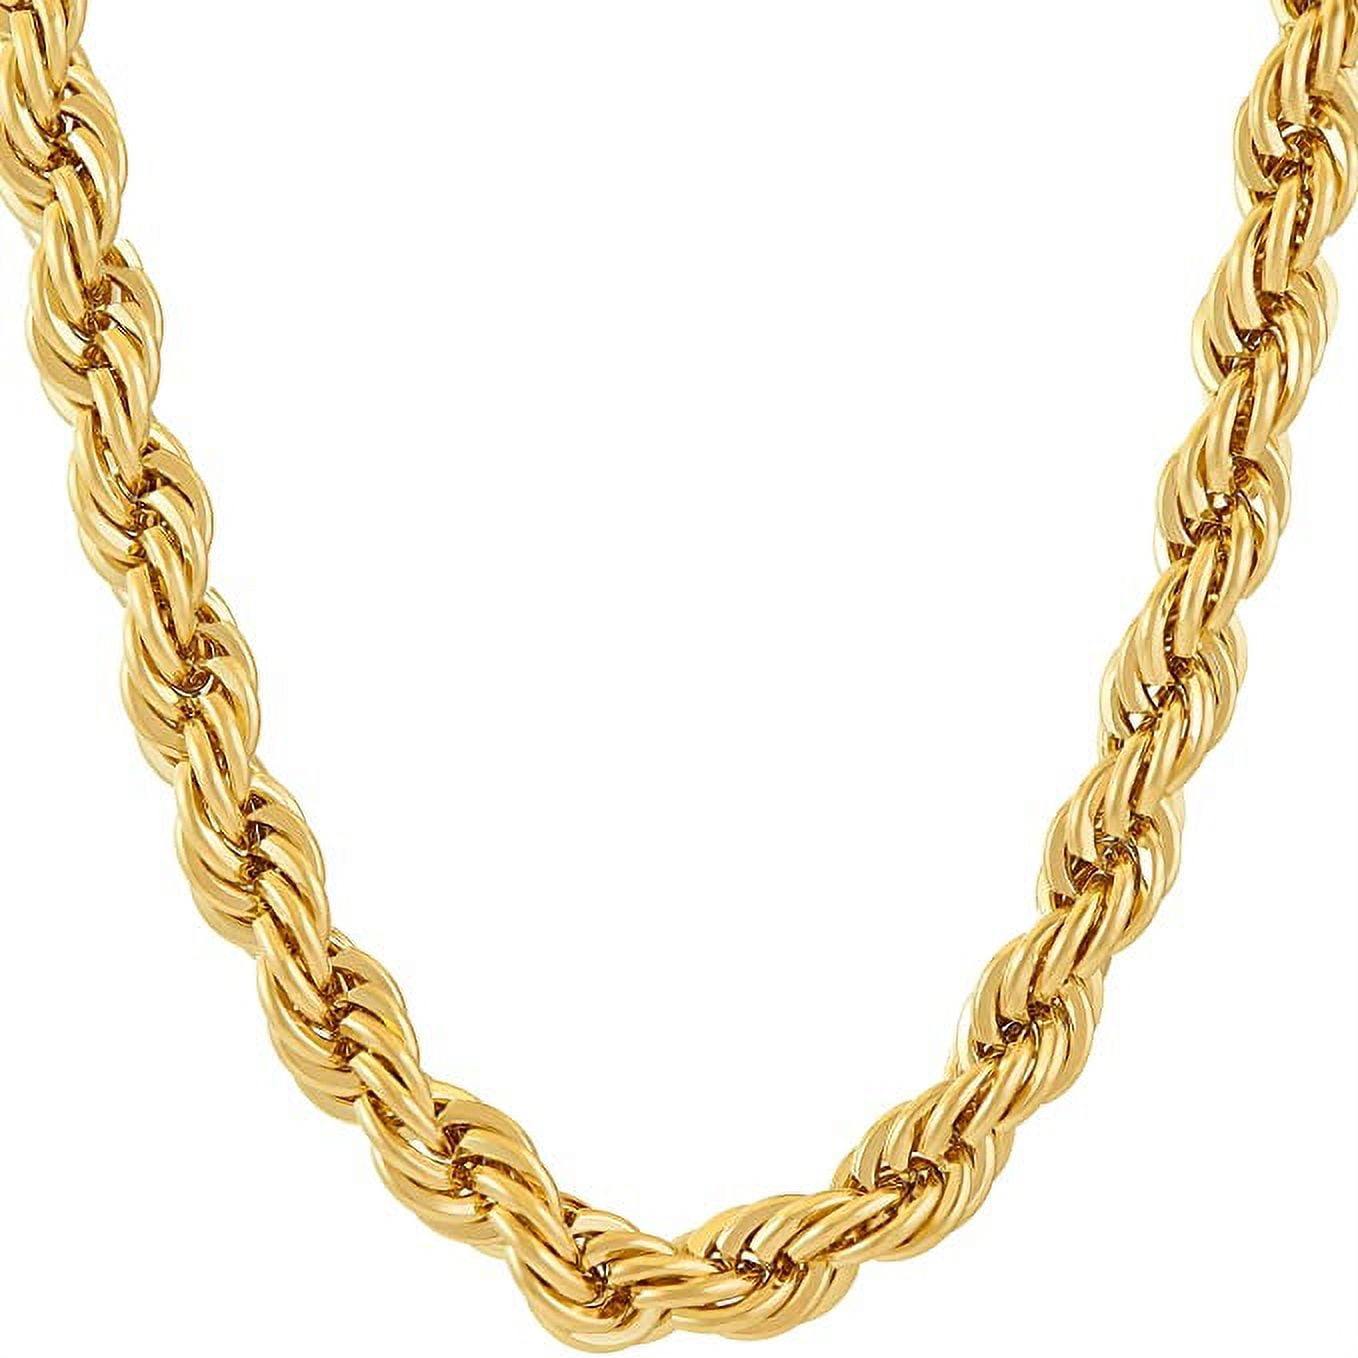 LIFETIME JEWELRY 7mm Rope Chain Necklace 24k Real Gold Plated-Women and Men  (20 mm)